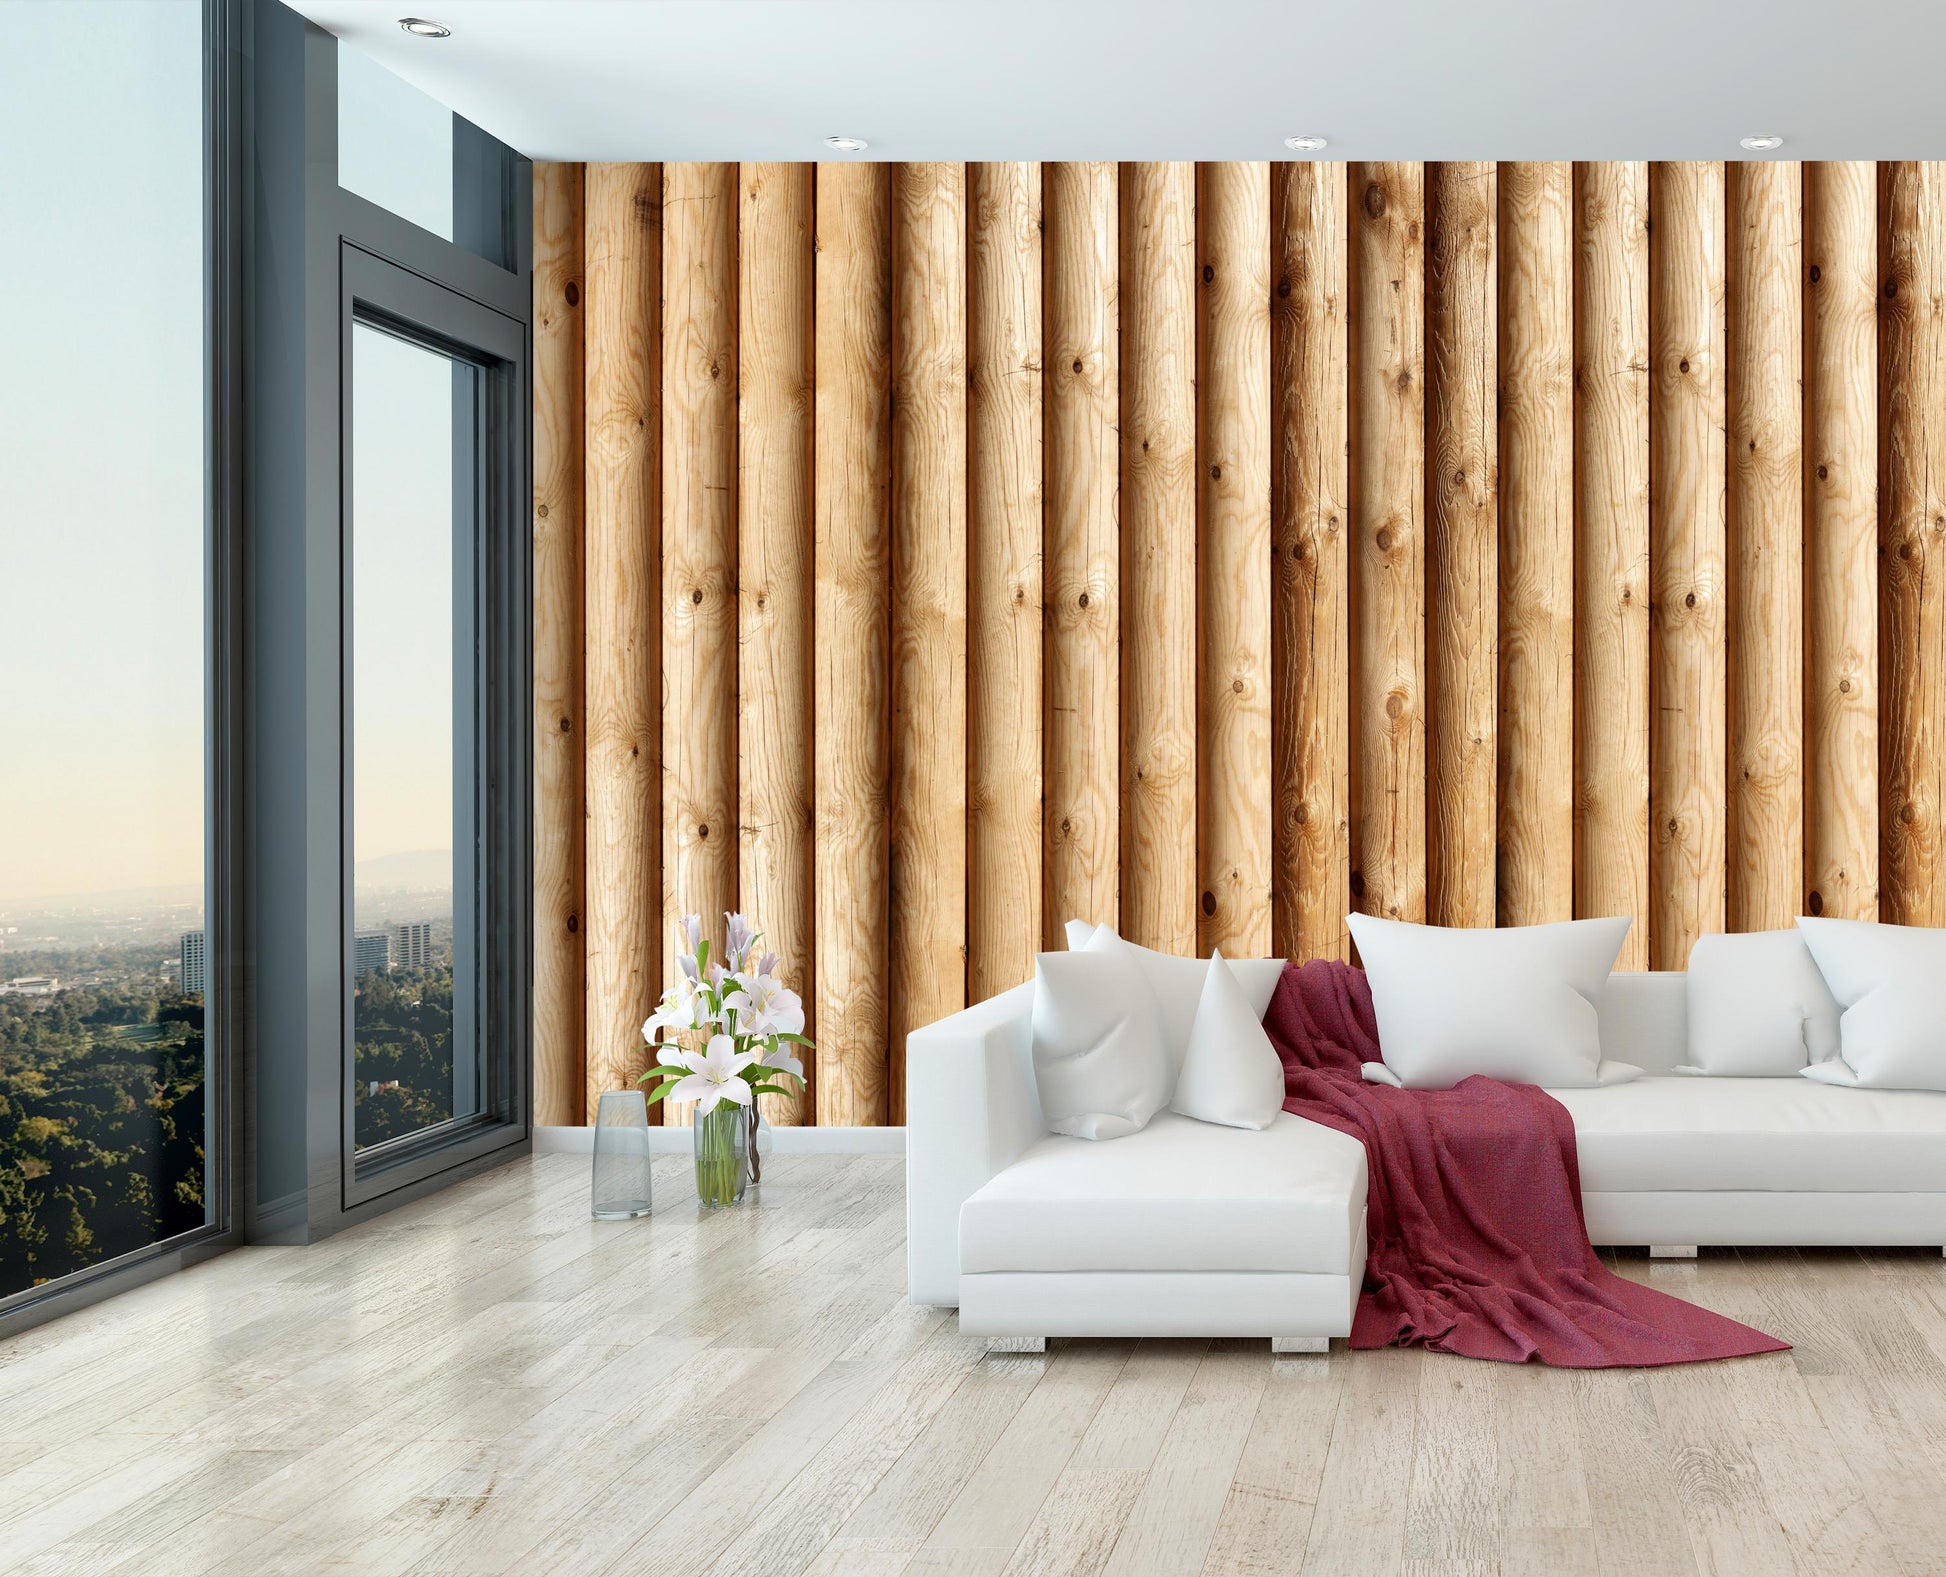 Discover the d wood effect wallpaper mural m